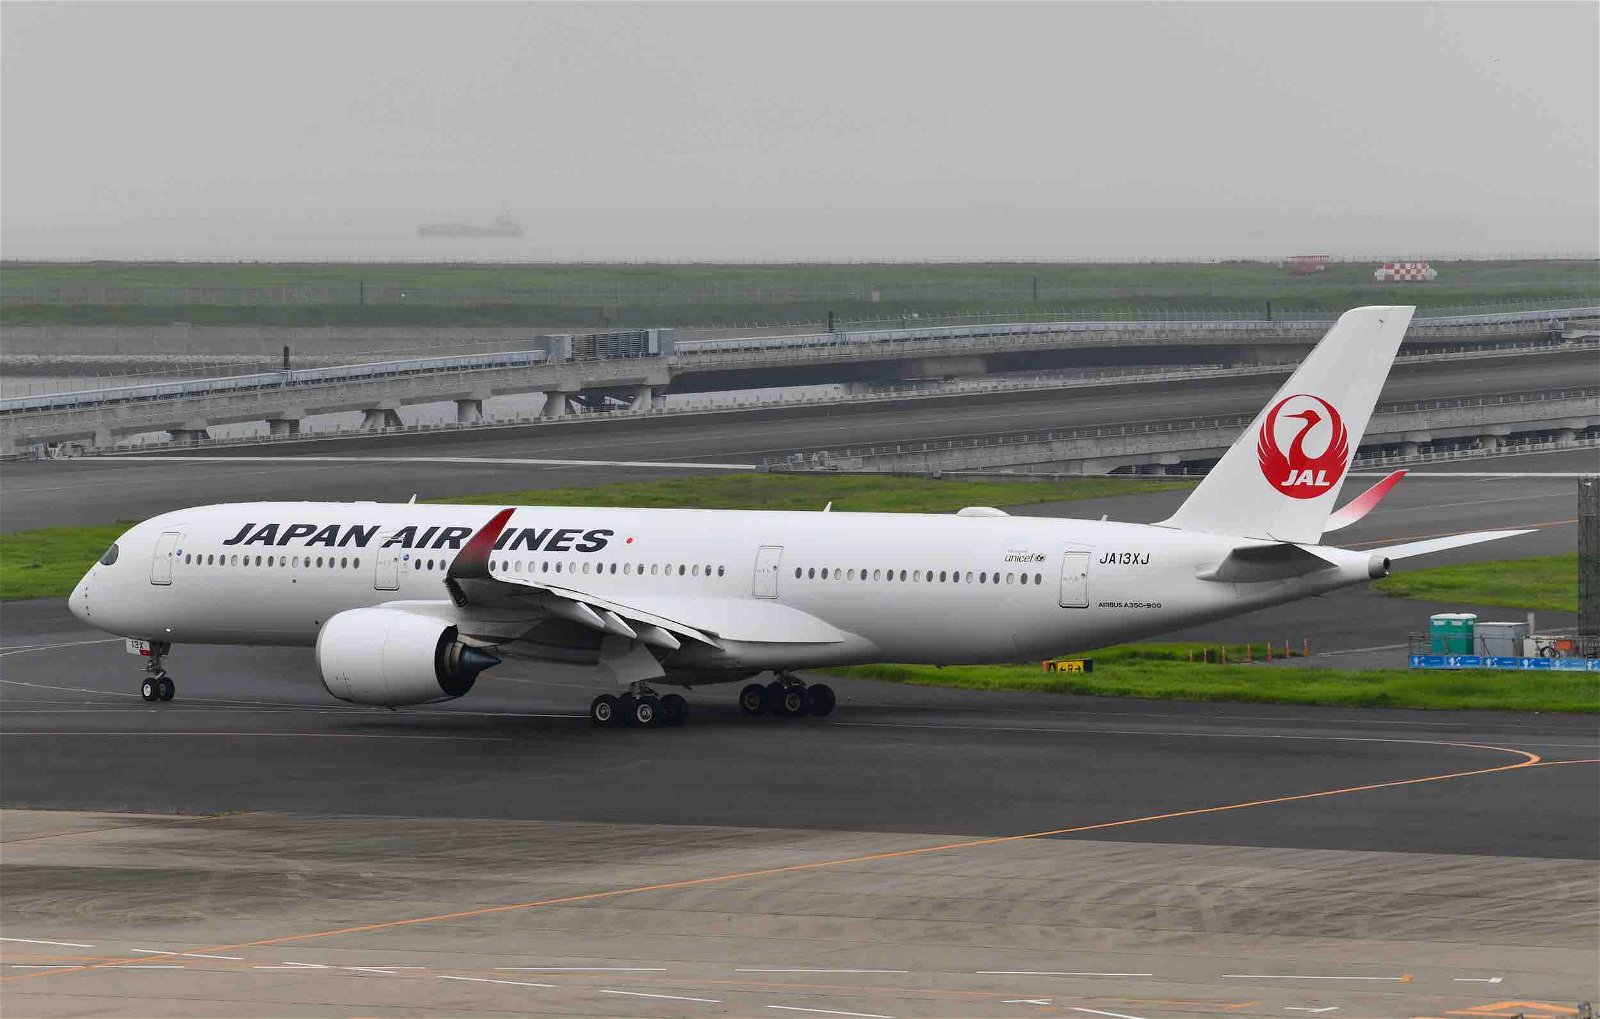 Japanese Airlines